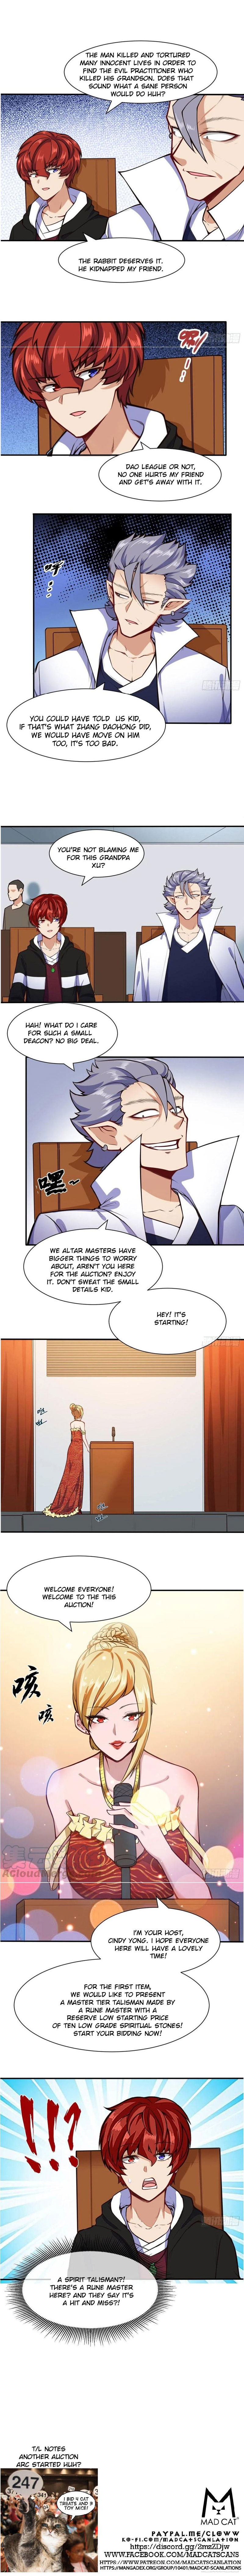 Metropolitan City's Ying Yang Miracle Doctor Chapter 117 page 2